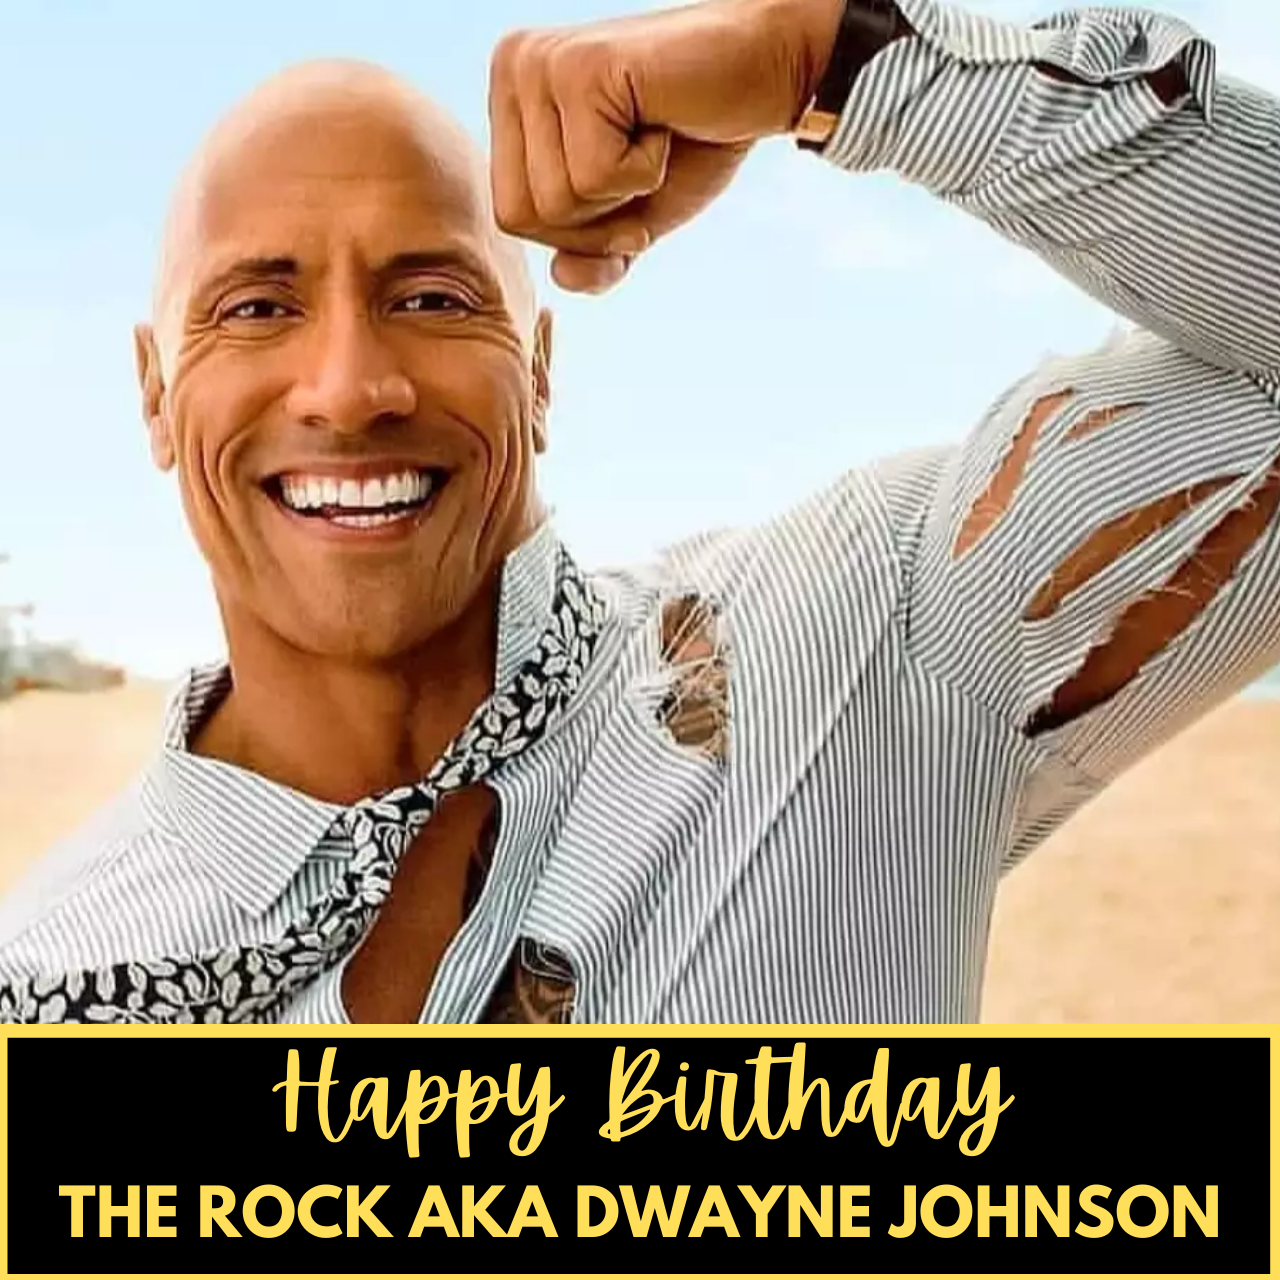 Happy Birthday Dwayne Johnson: Wishes, Card, Meme, Messages, Images, and Gif to share with The Rock